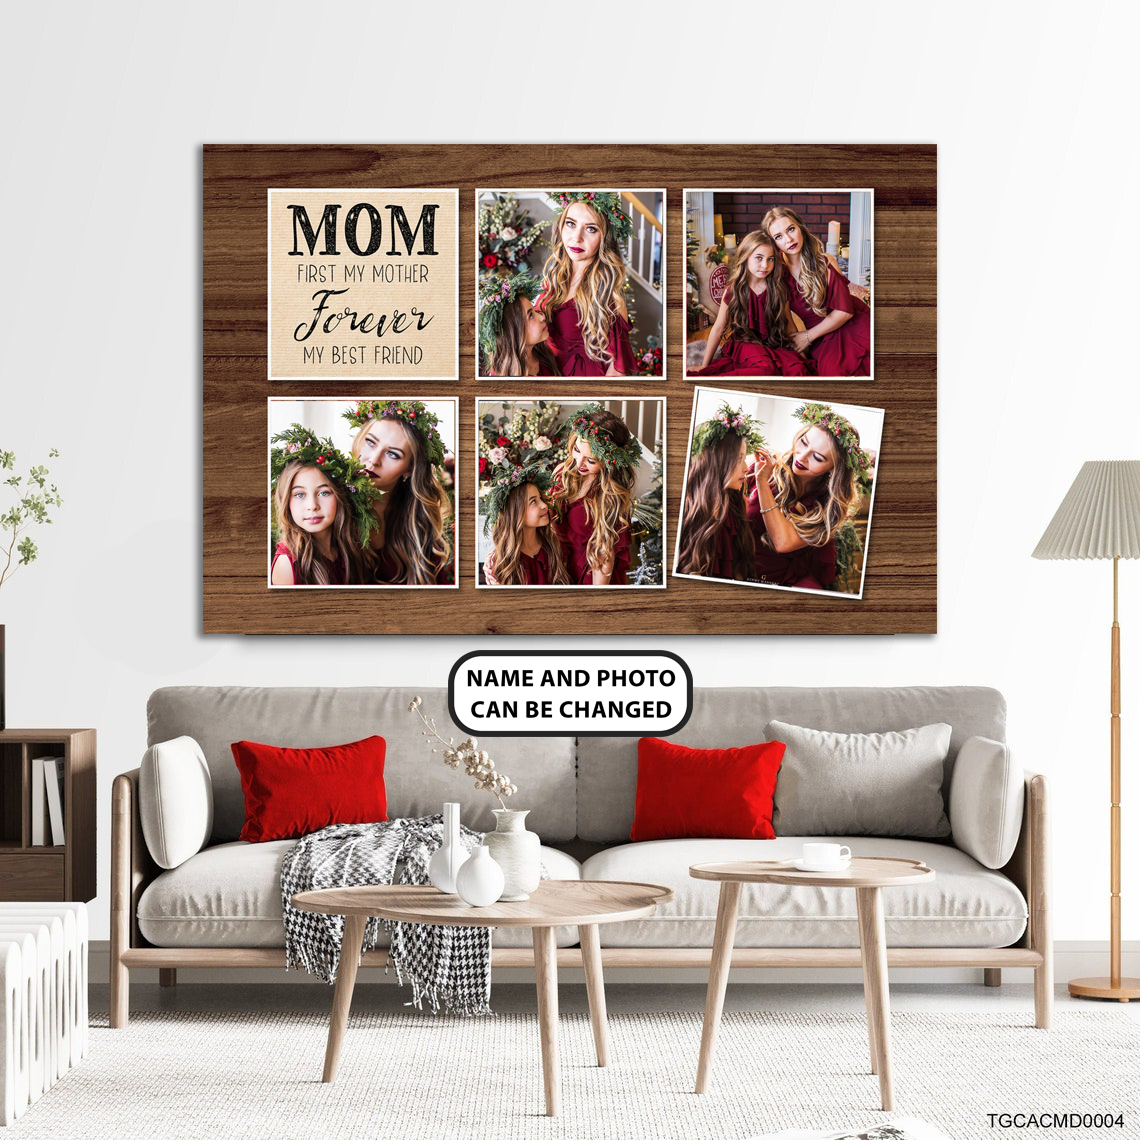 PresentsPrints, Mom, First my Mother Forever My Best Friend, Personalized Canvas, Mother's Day Gift